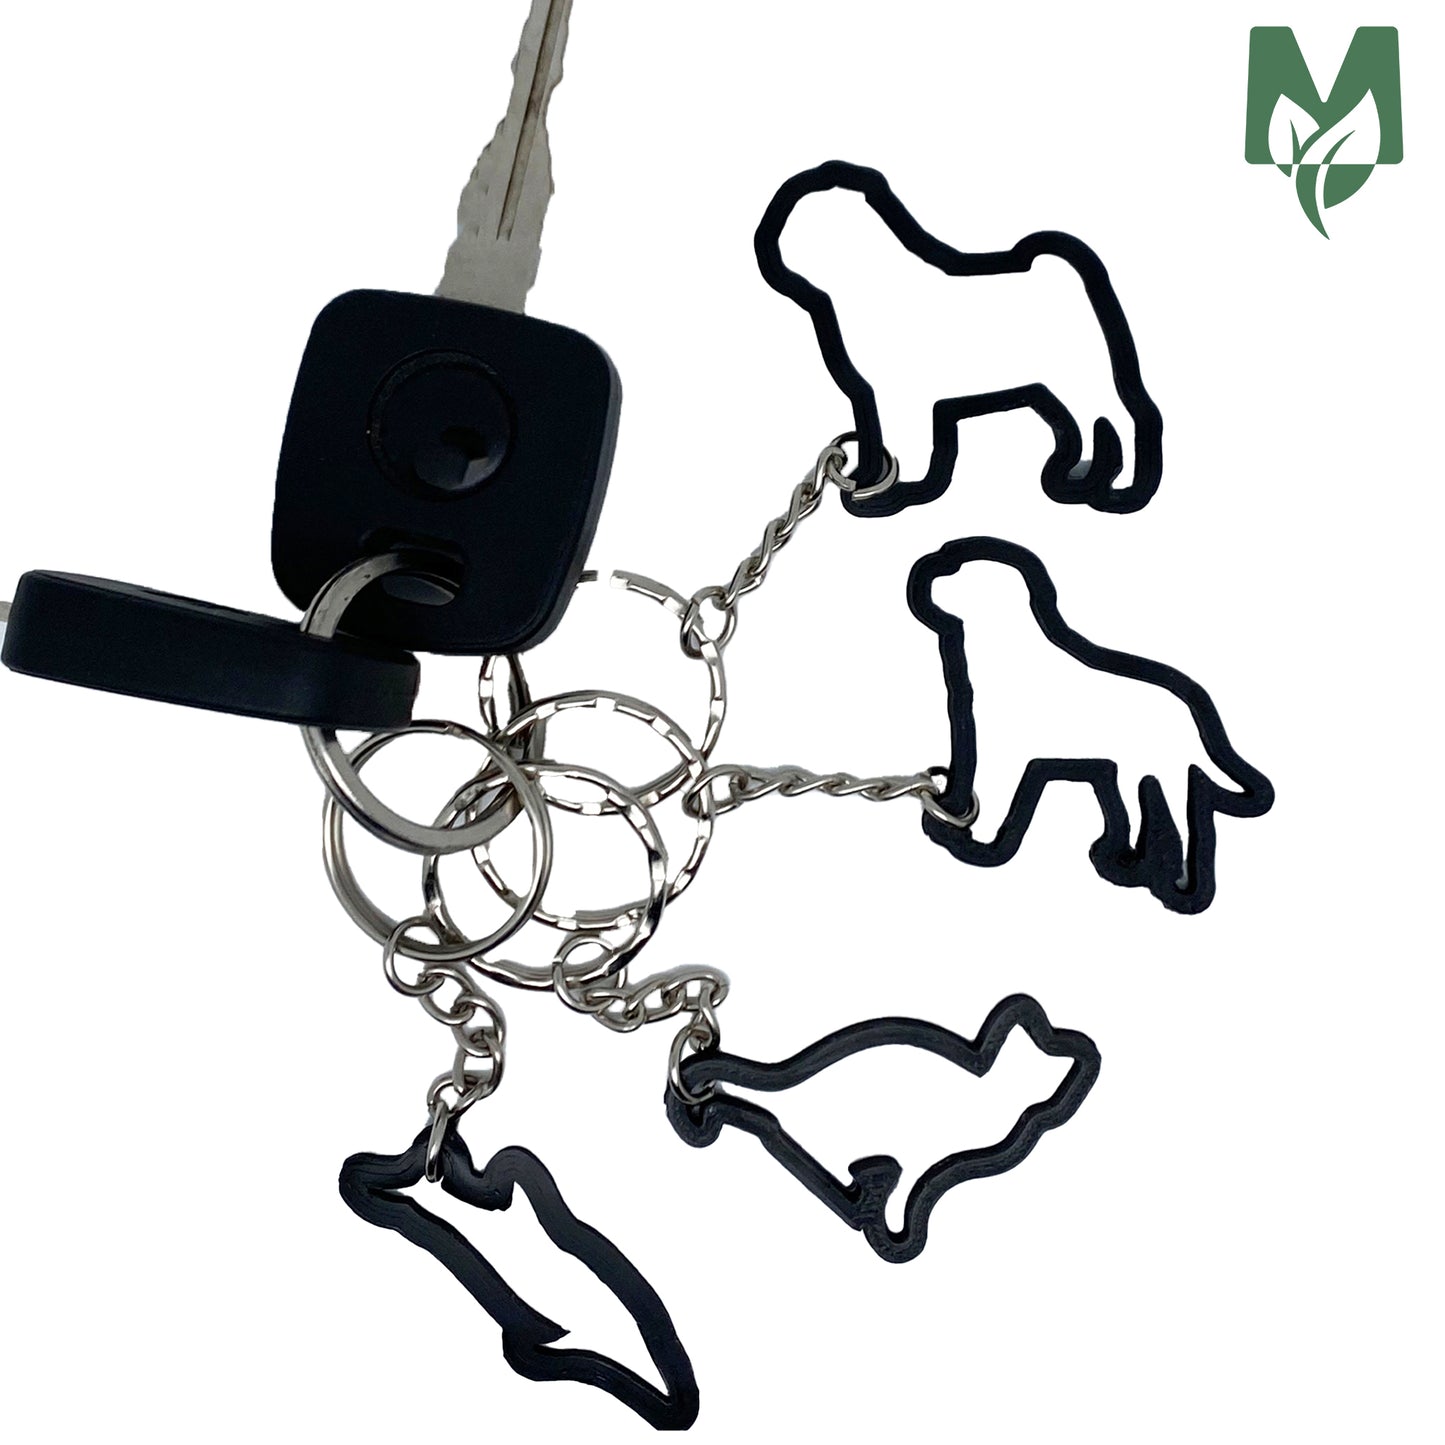 Animal Keyrings - Made From Recycled Discarded Plastics!